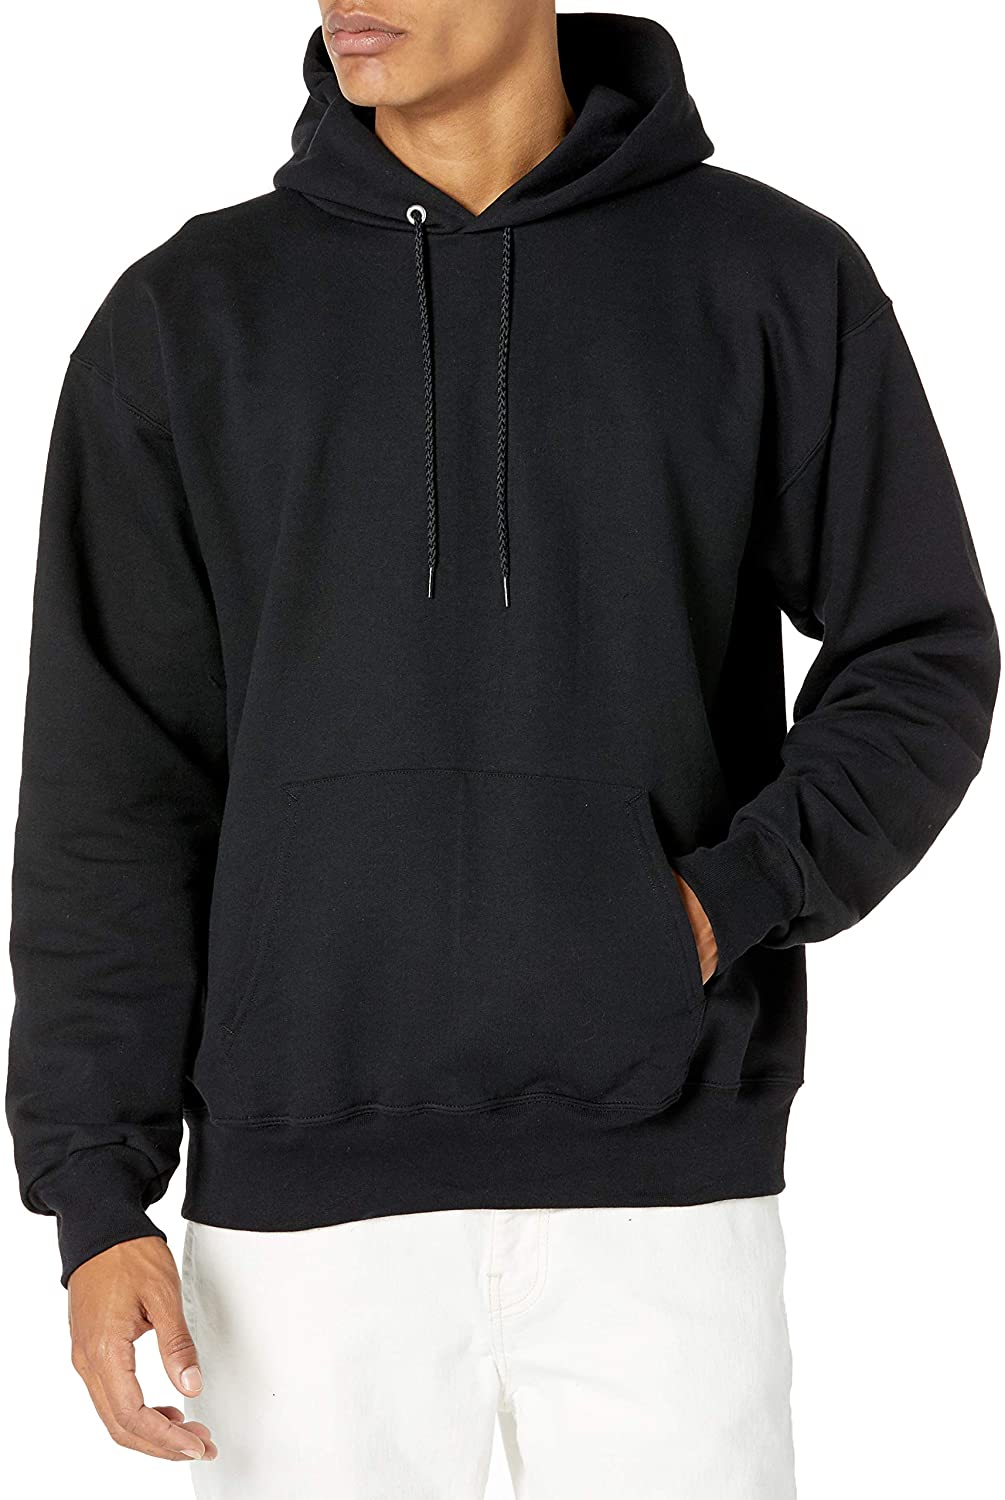 Hanes Men's Ultimate Cotton Heavyweight Pullover Hoodie F170 Black S - XL